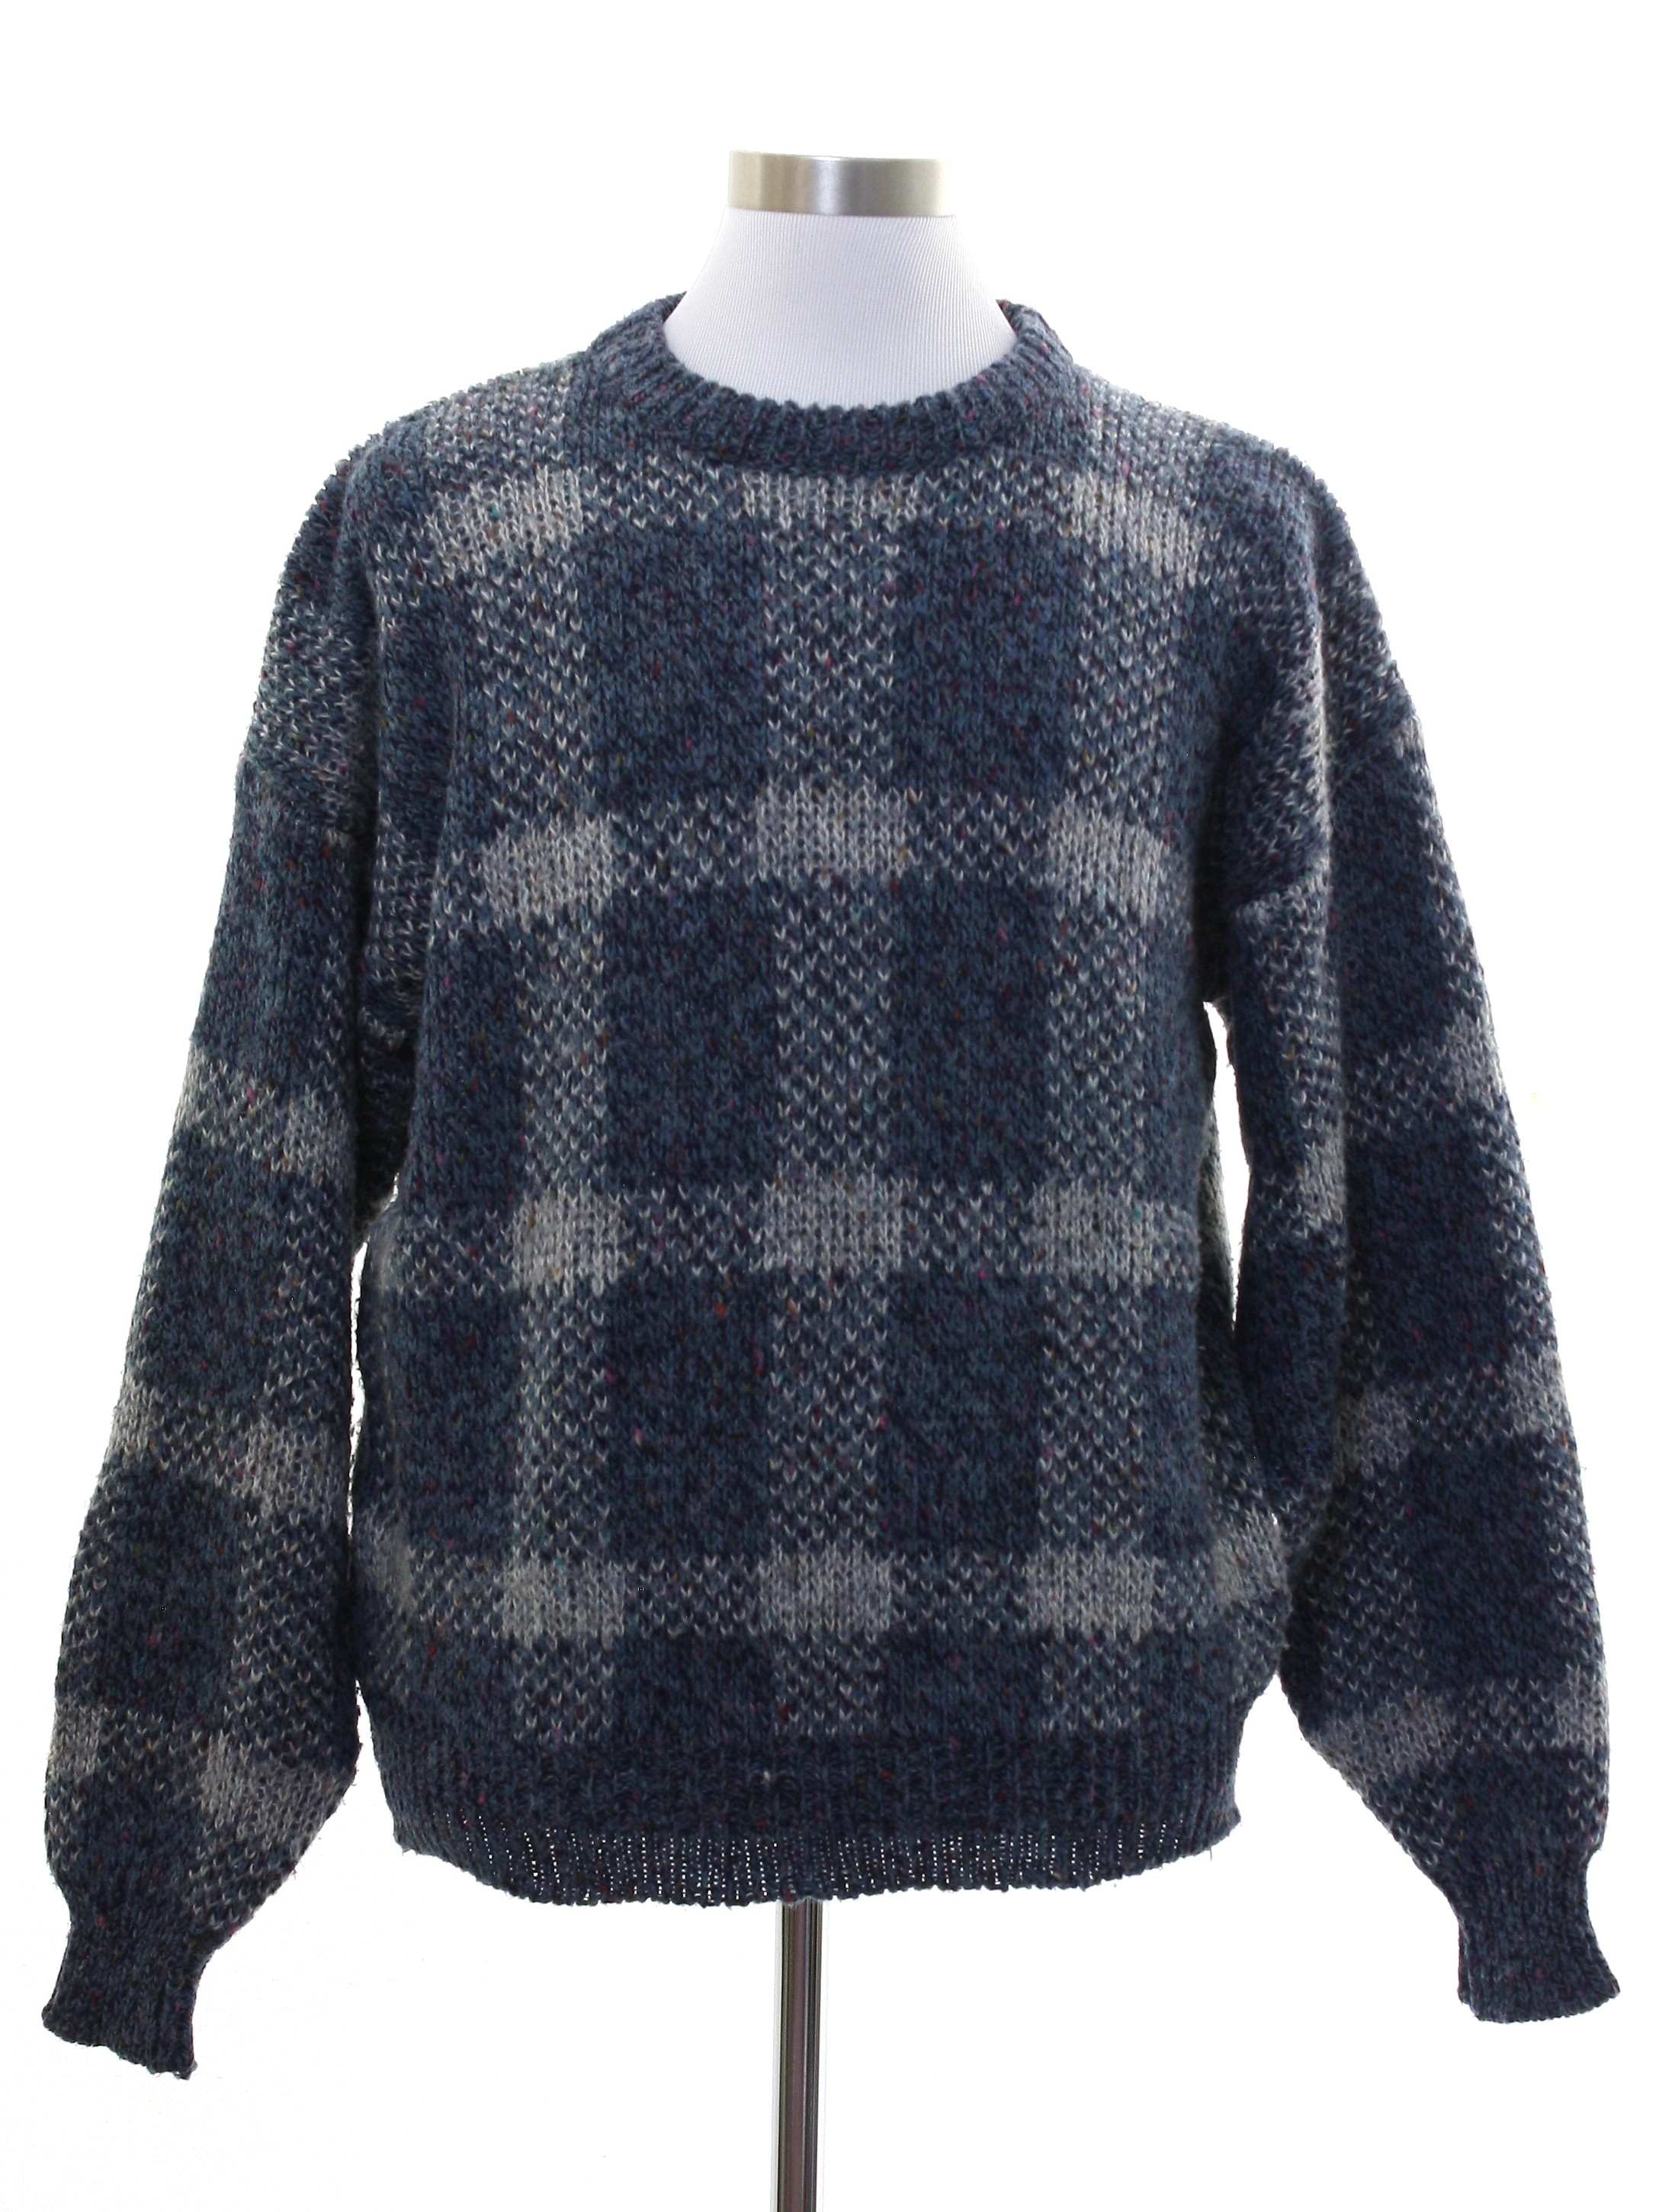 1980s Peter England Sweater: 80s -Peter England- Mens dusty blue ...